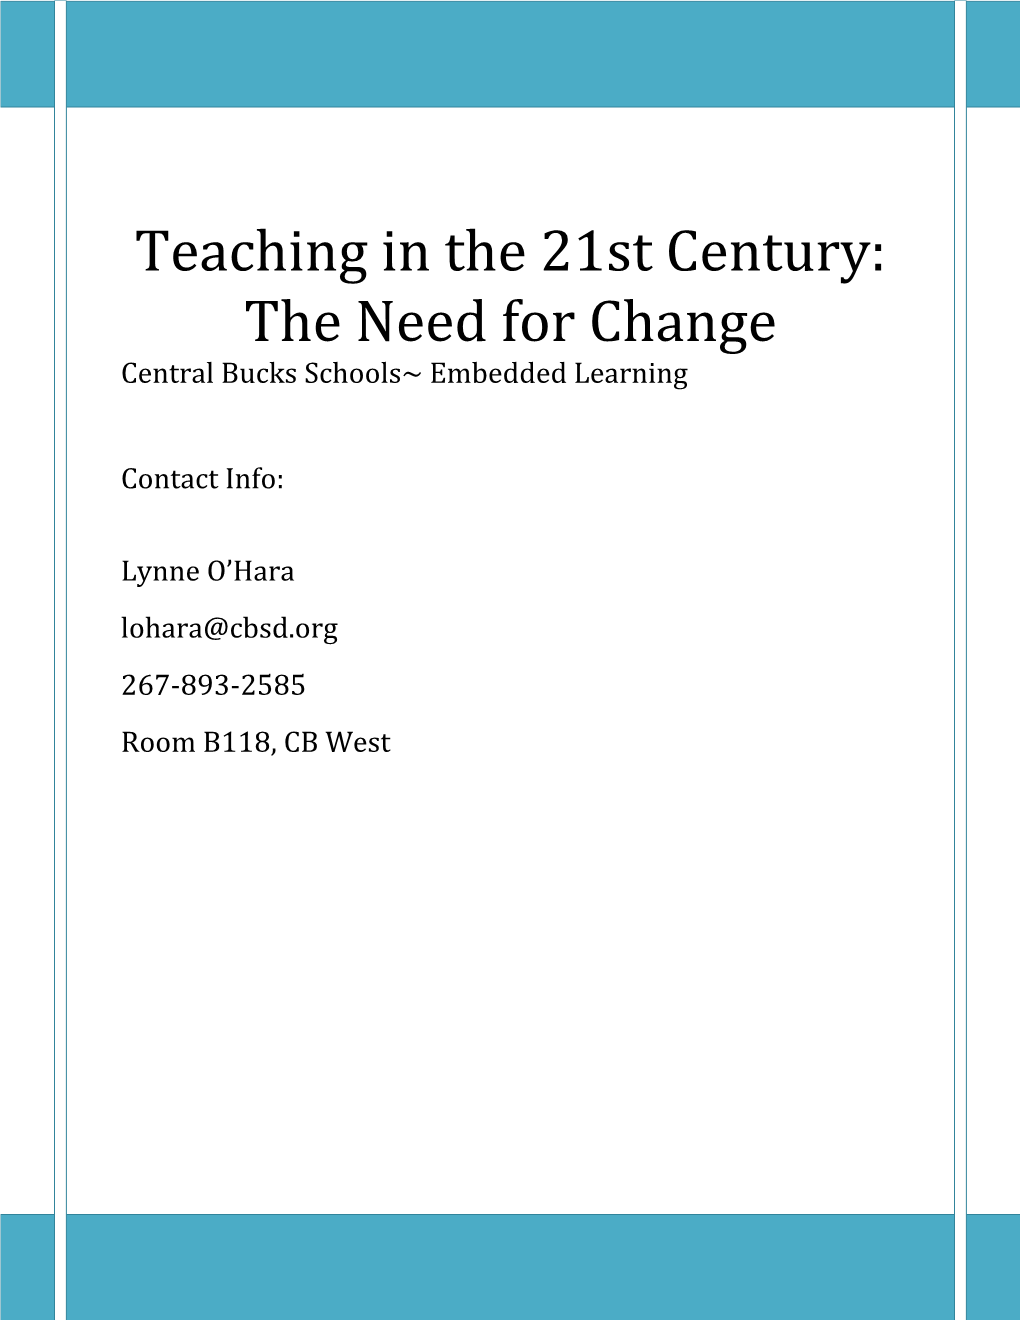 Teaching in the 21St Century: the Need for Change